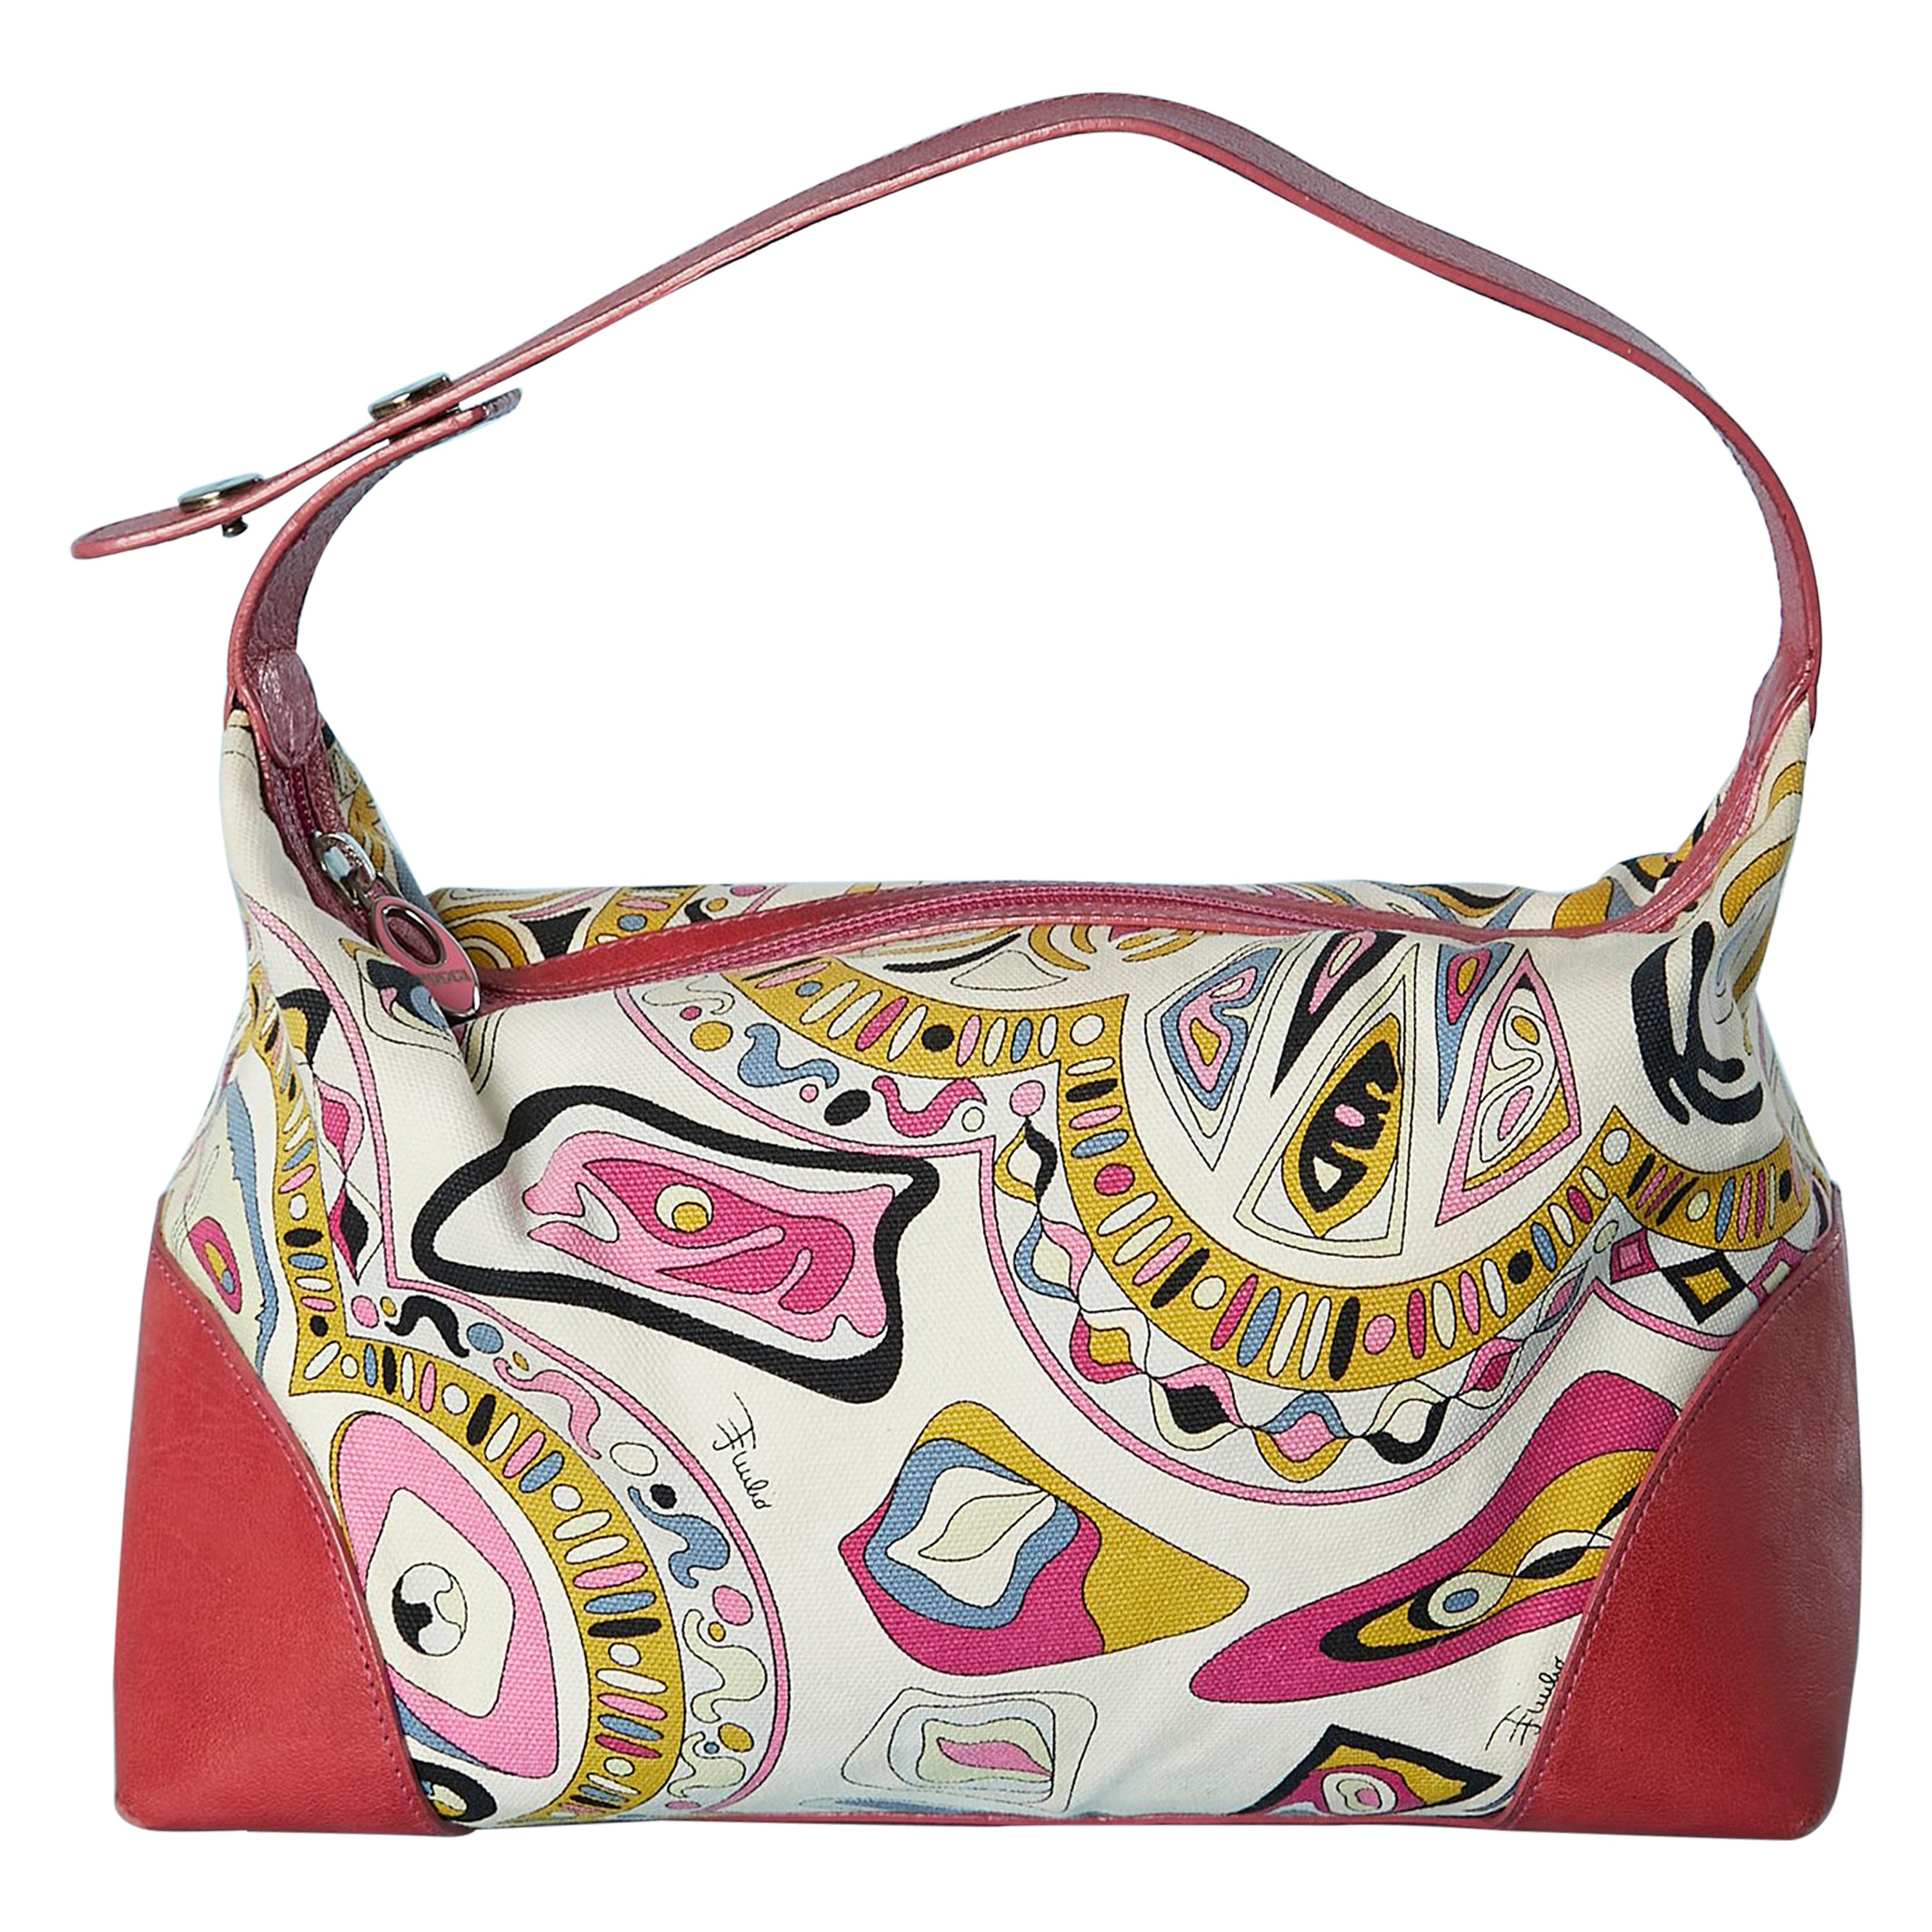 Printed canevas and red leather handbag Emilio PUCCI  For Sale